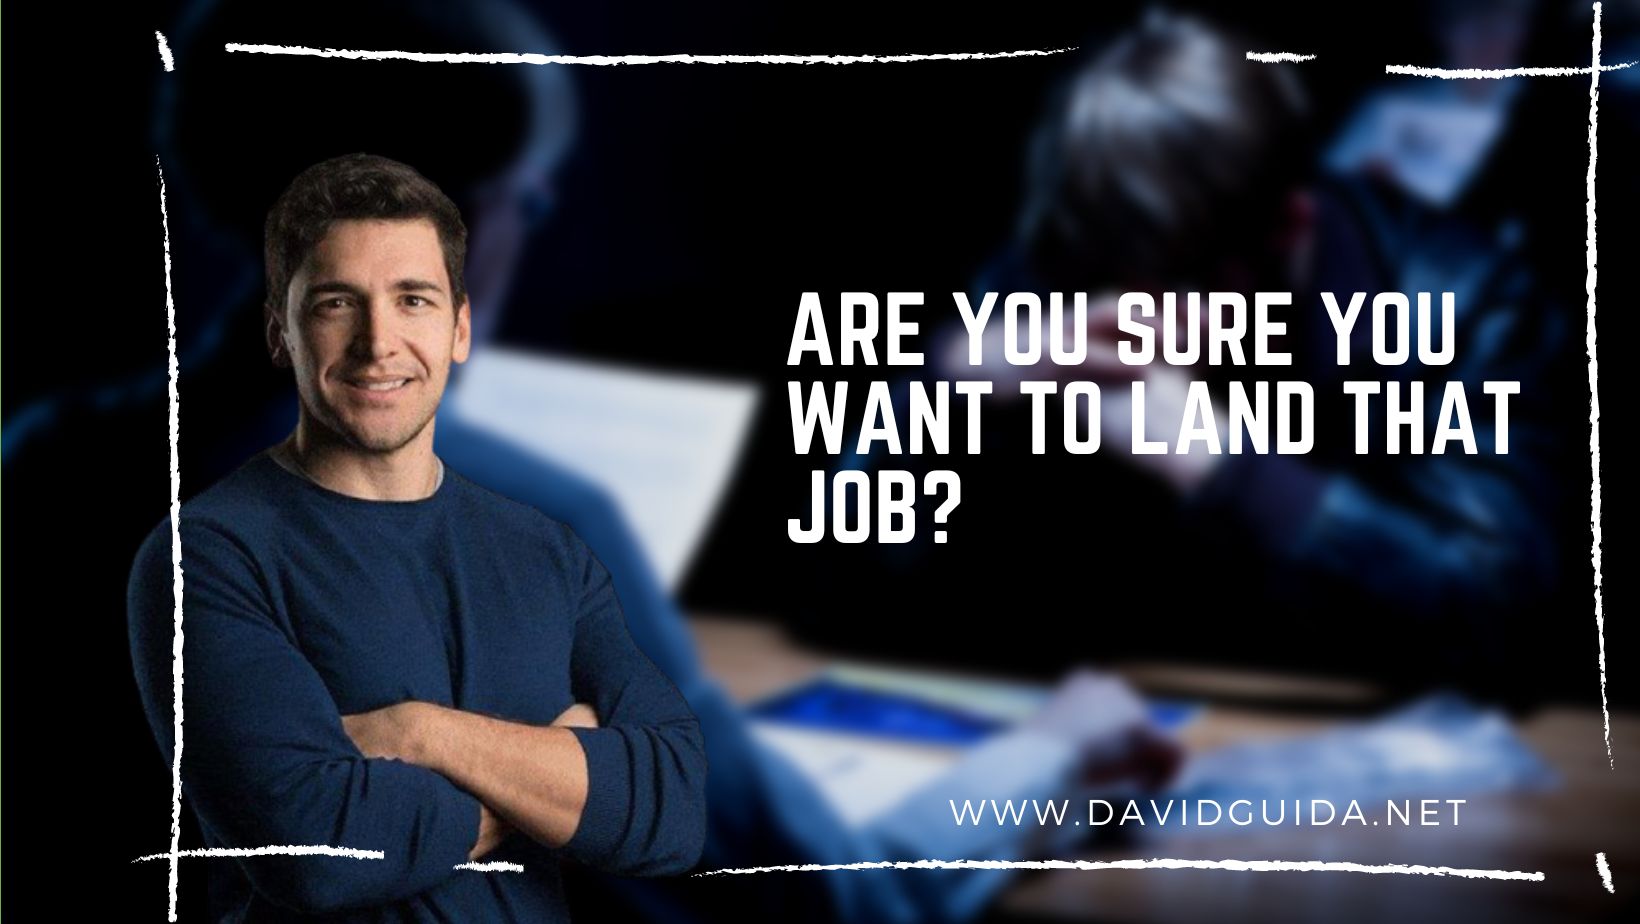 Are you sure you want to land that job?